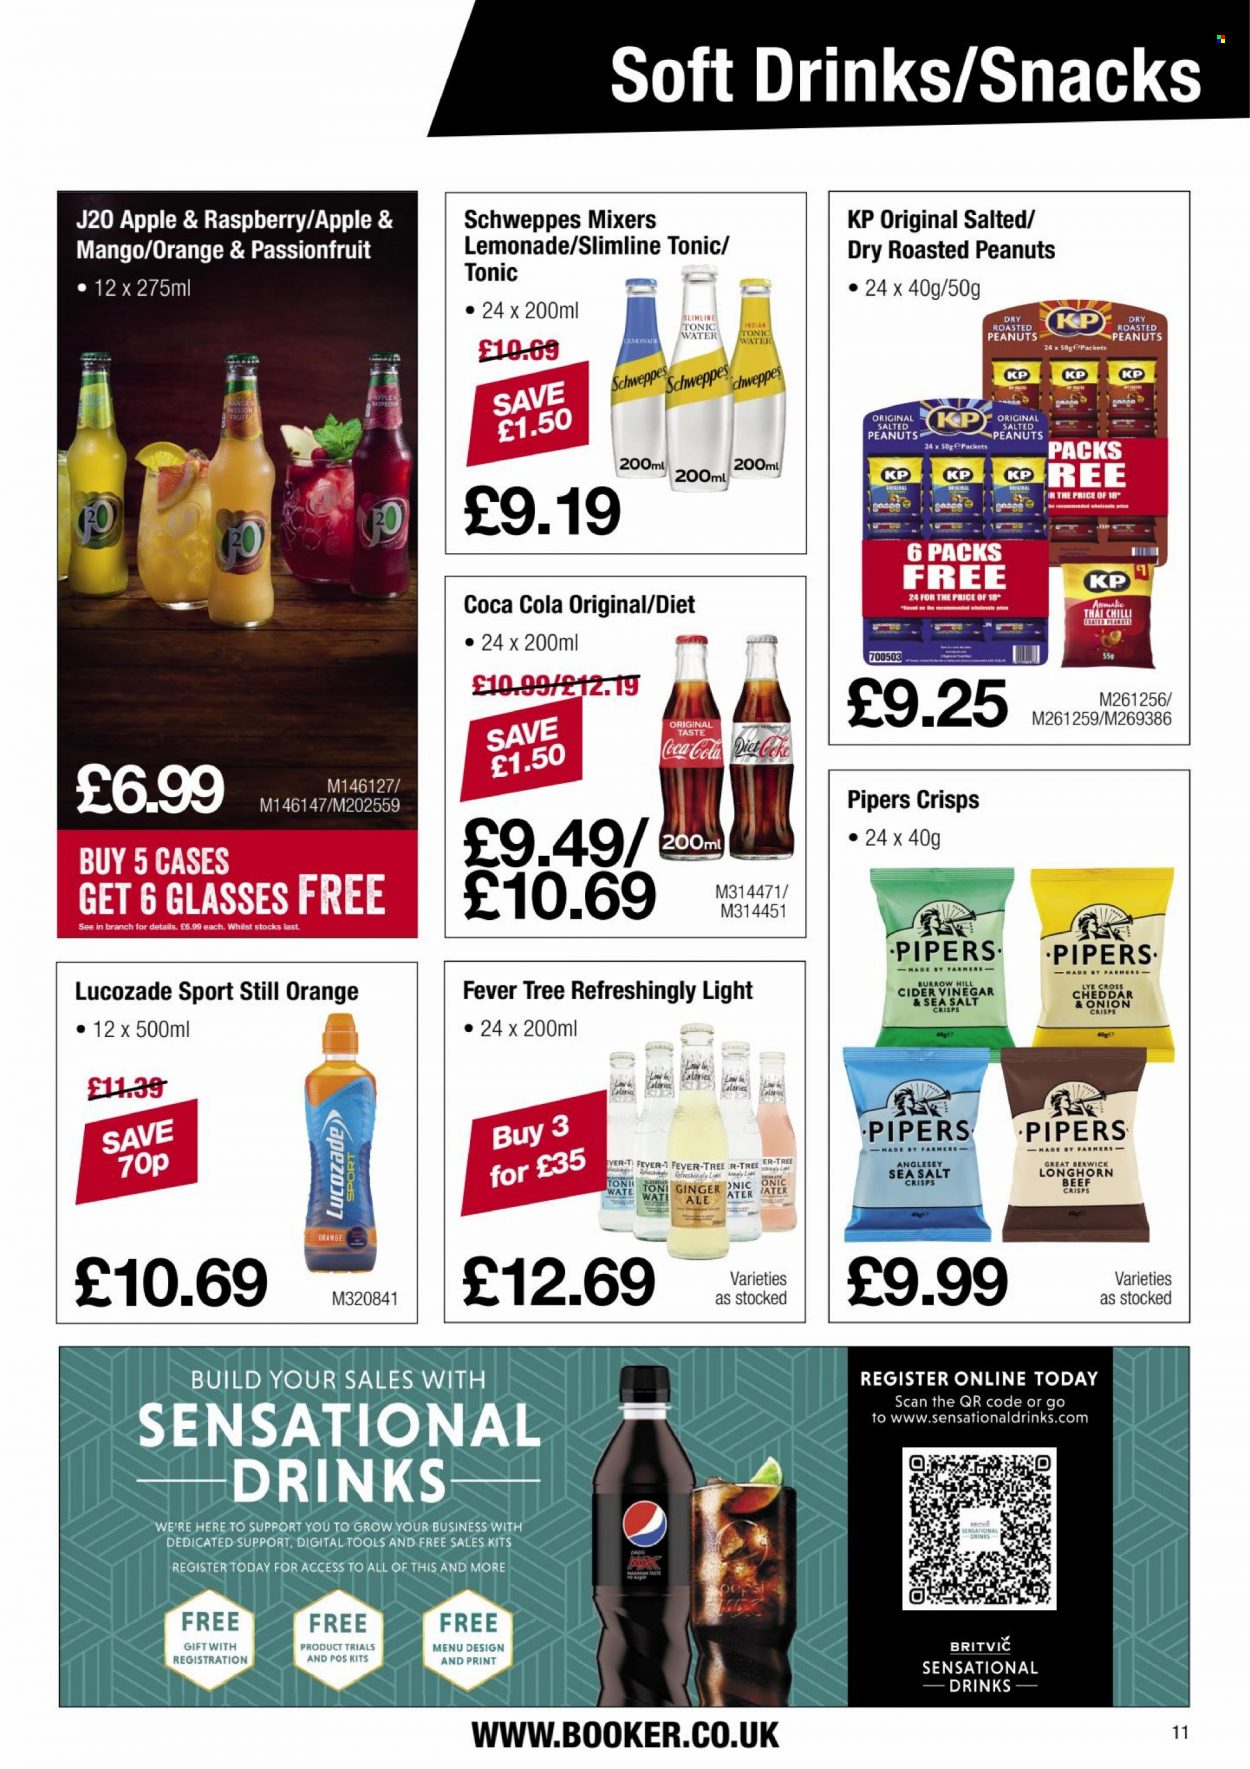 Makro offer  - 6.12.2021 - 4.1.2022 - Sales products - ginger, longhorn cheese, cheddar, cheese, snack, apple cider vinegar, dry roasted peanuts, roasted peanuts, peanuts, Coca-Cola, lemonade, Schweppes, tonic, soft drink, Lucozade, cider. Page 11.